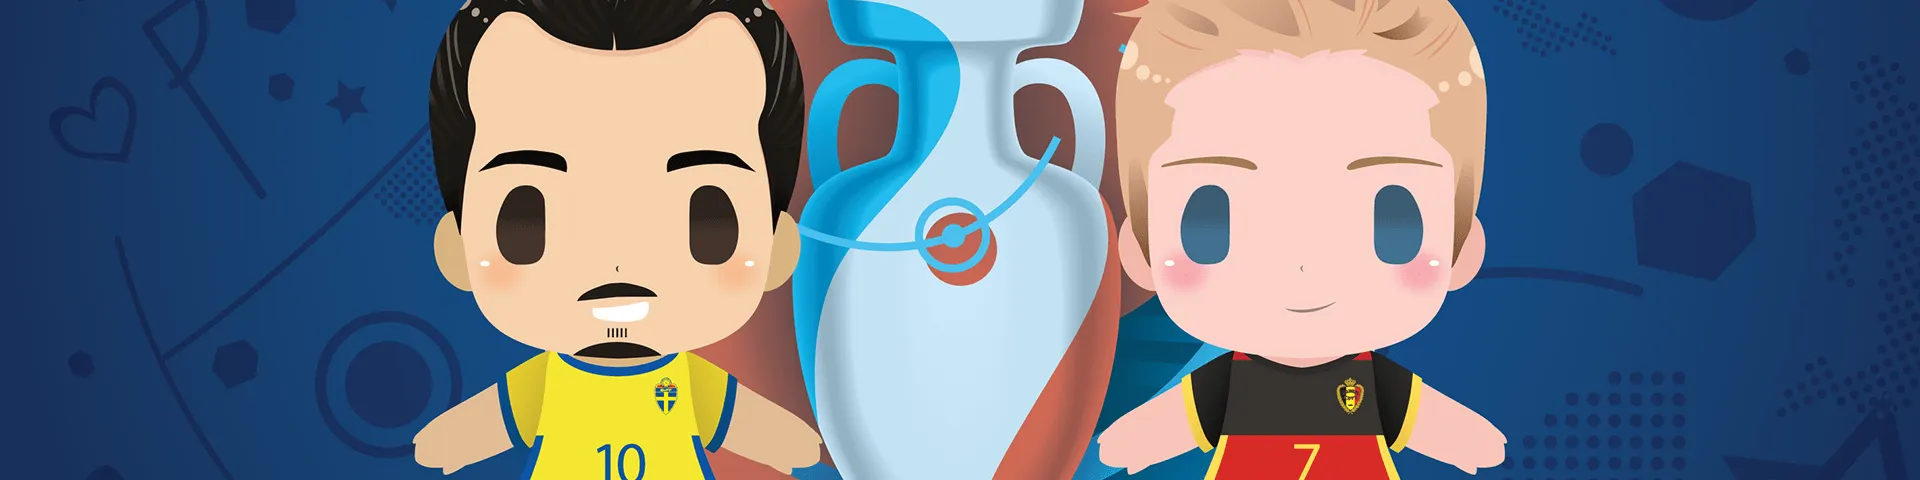 Chibi versions of Zlatan Ibrahimovic and Kevin De Bruyne standing, and between them is the Euro 2016 Cup.